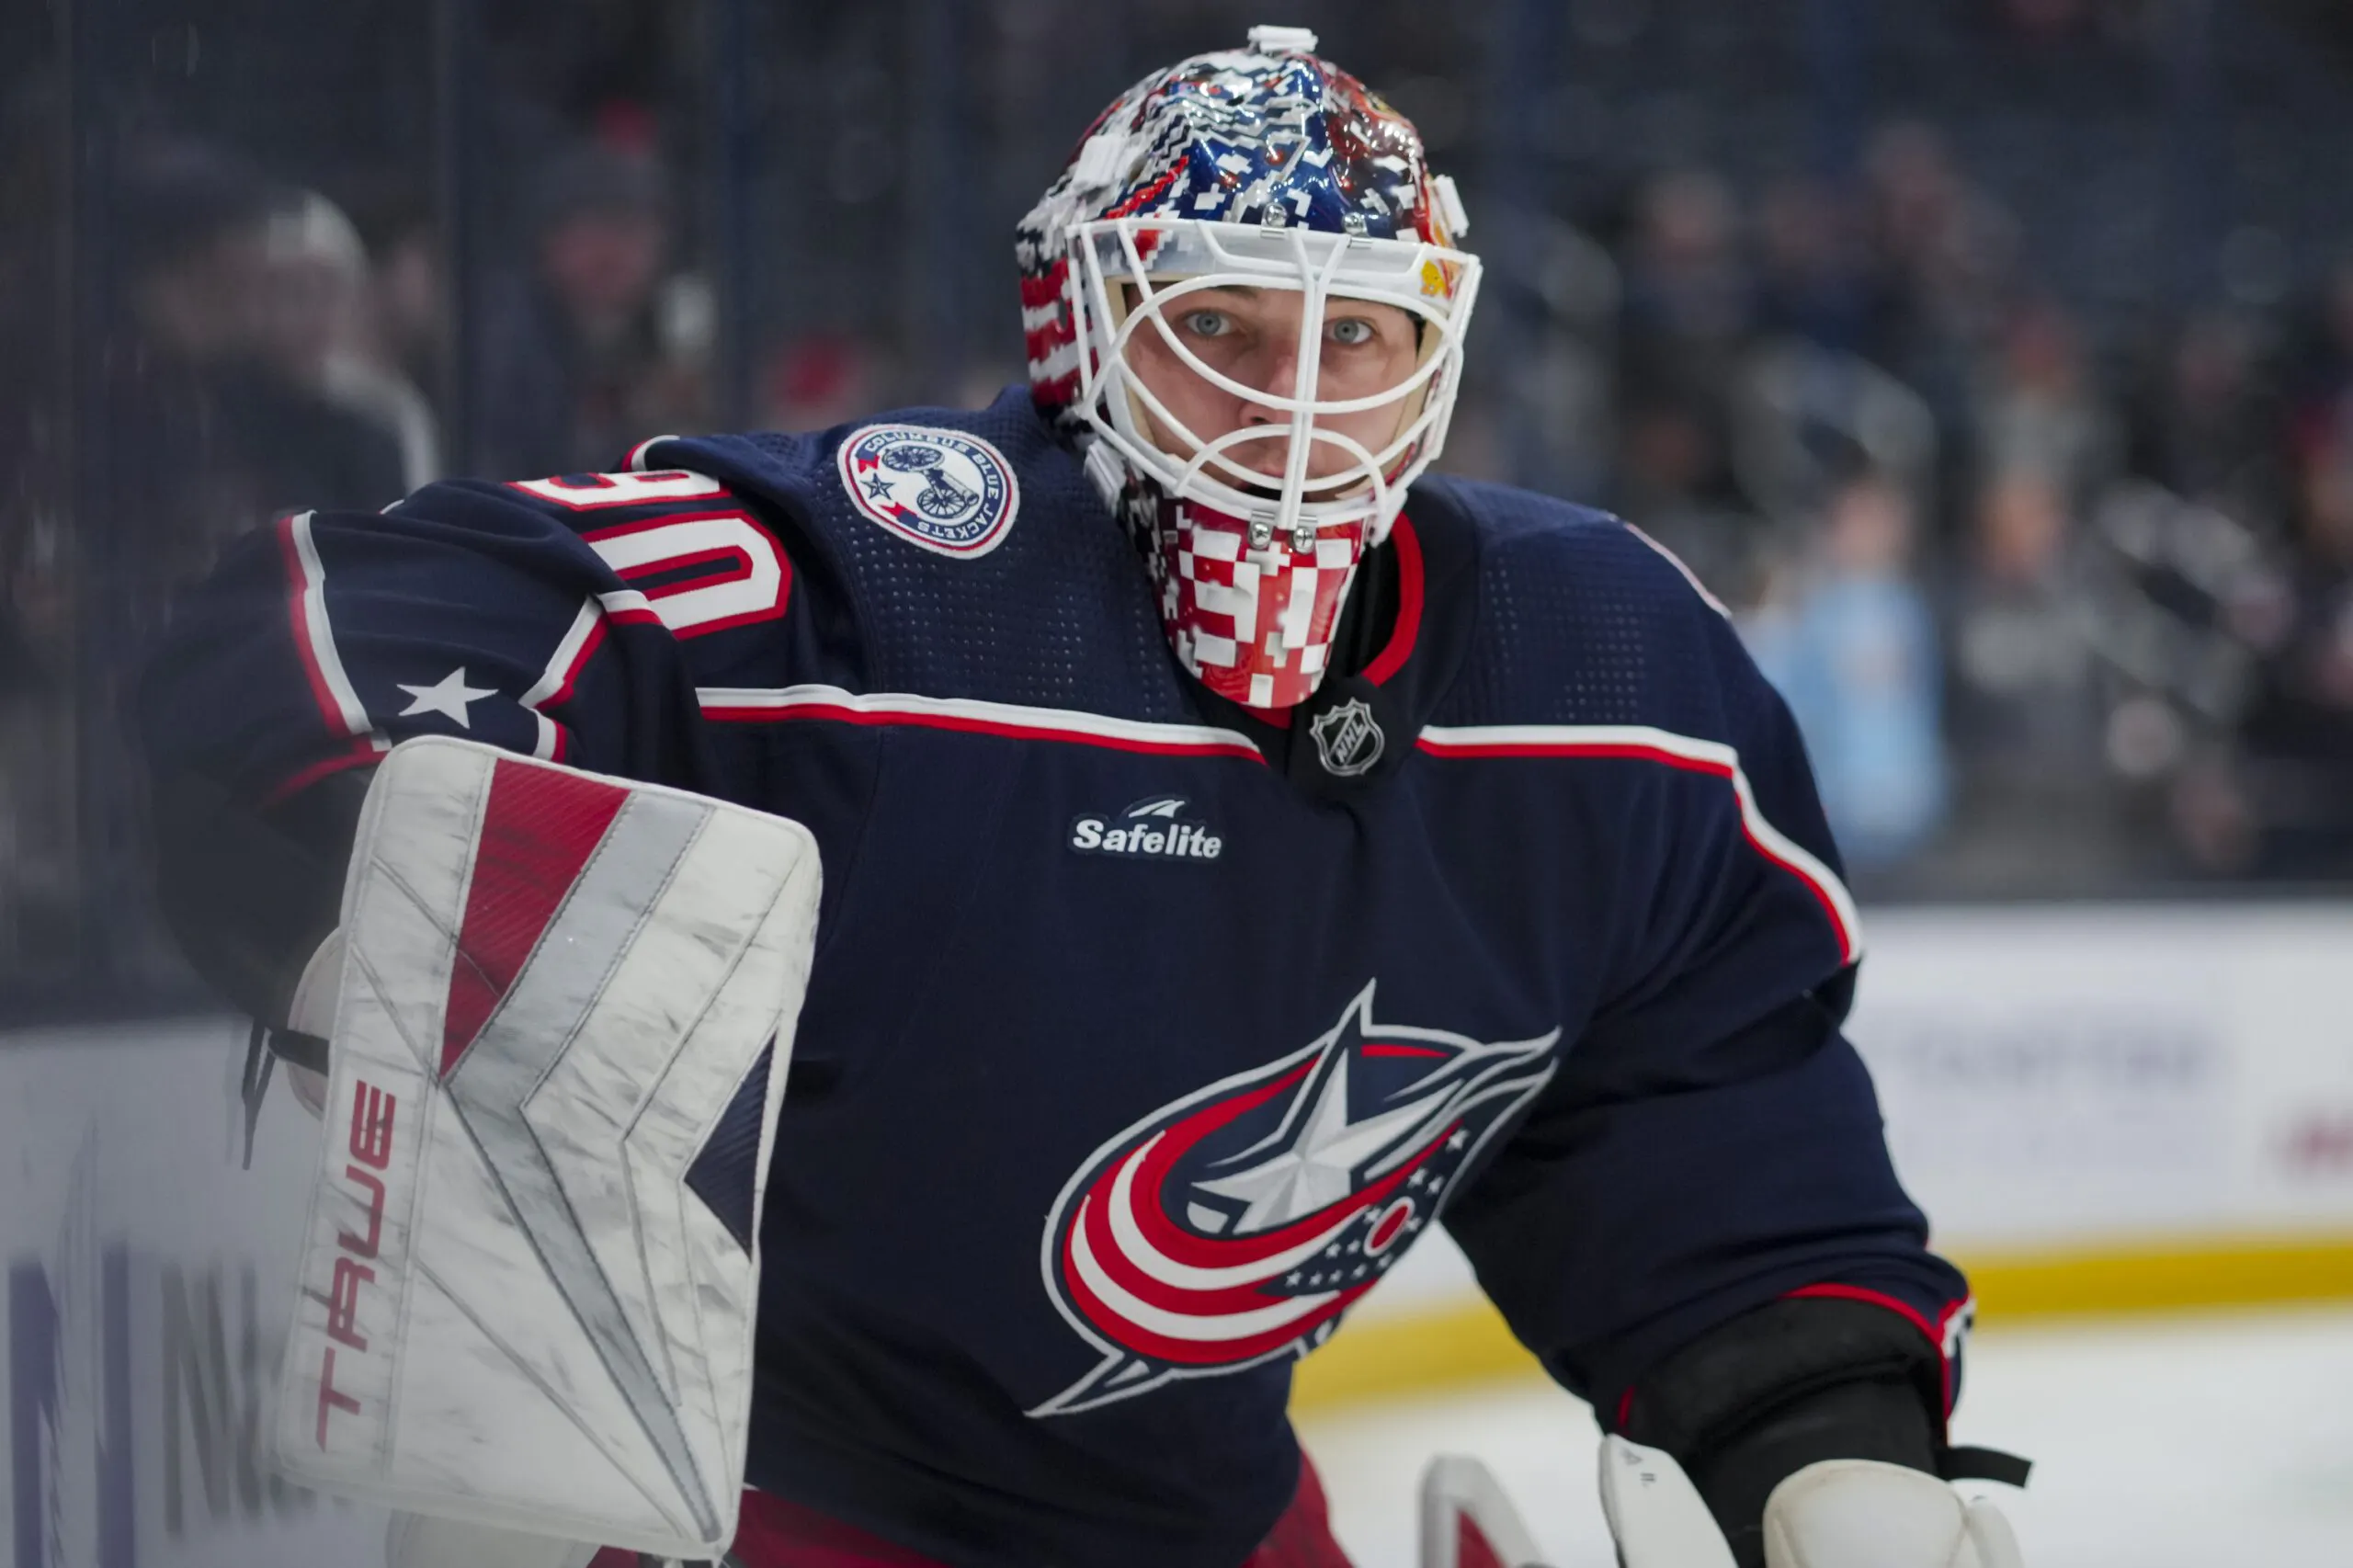 What happens next for Elvis Merzlikins and the Columbus Blue Jackets